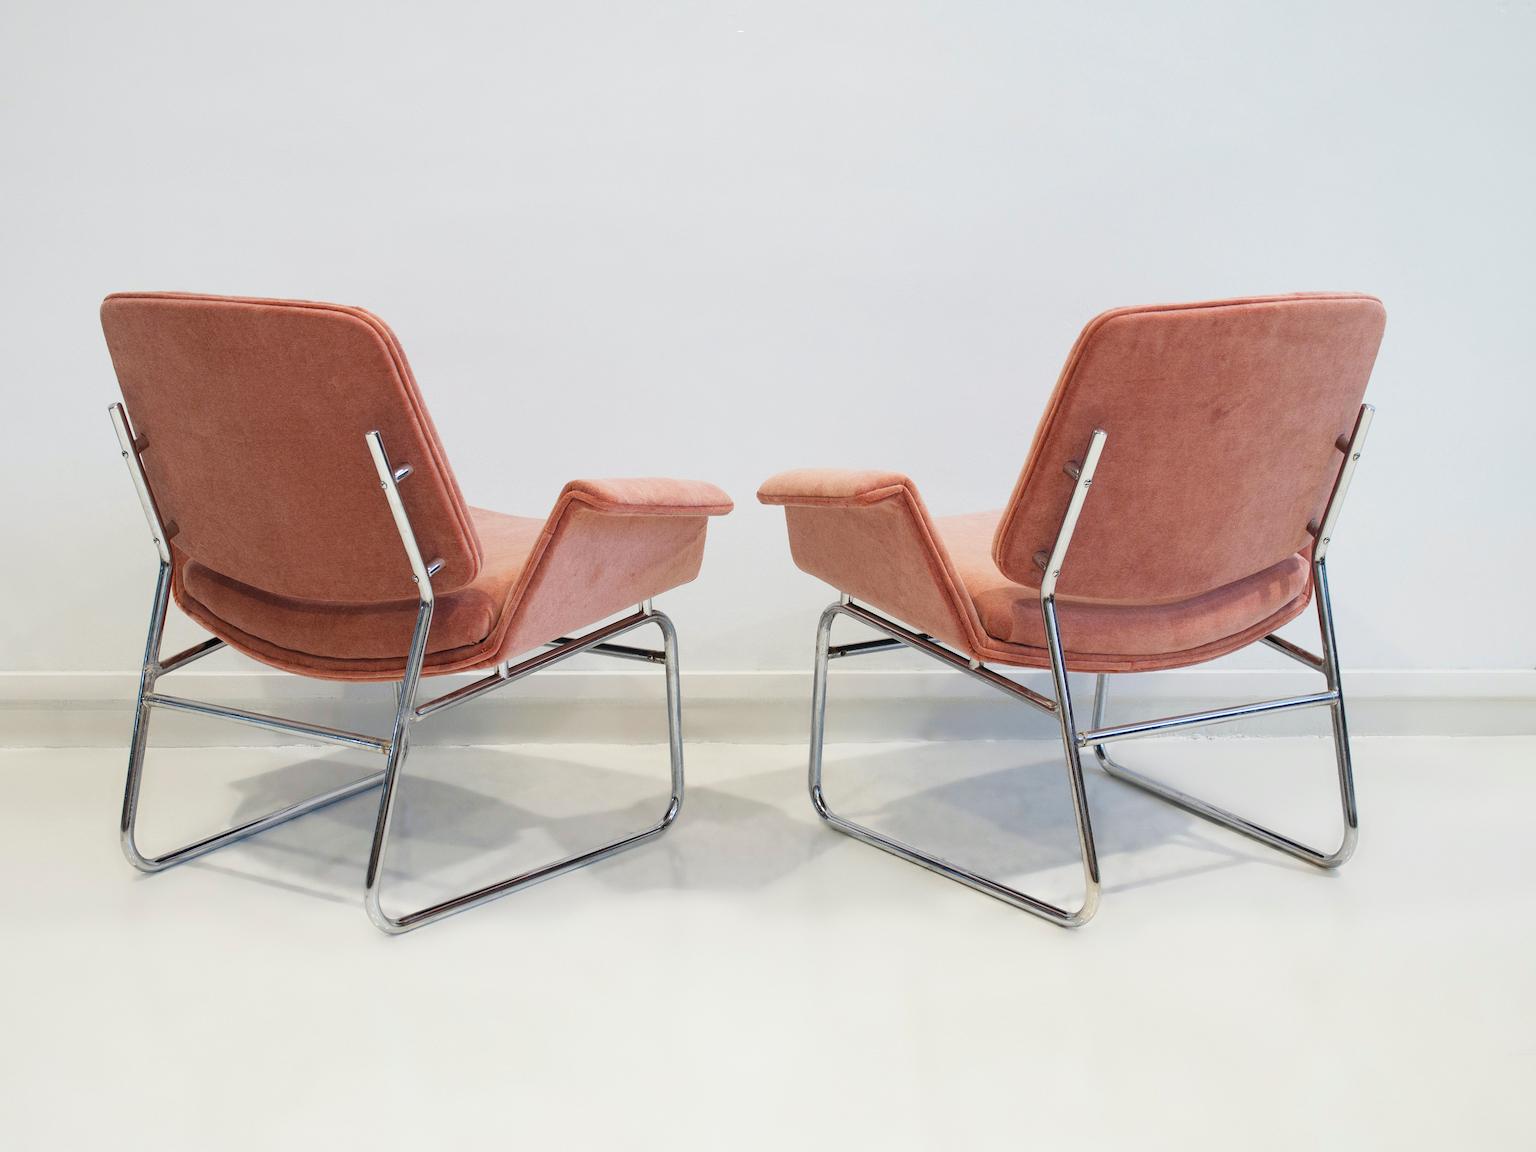 Pair of Mid-Century Modern Pink Fabric and Chrome Lounge Chairs by Arflex 1